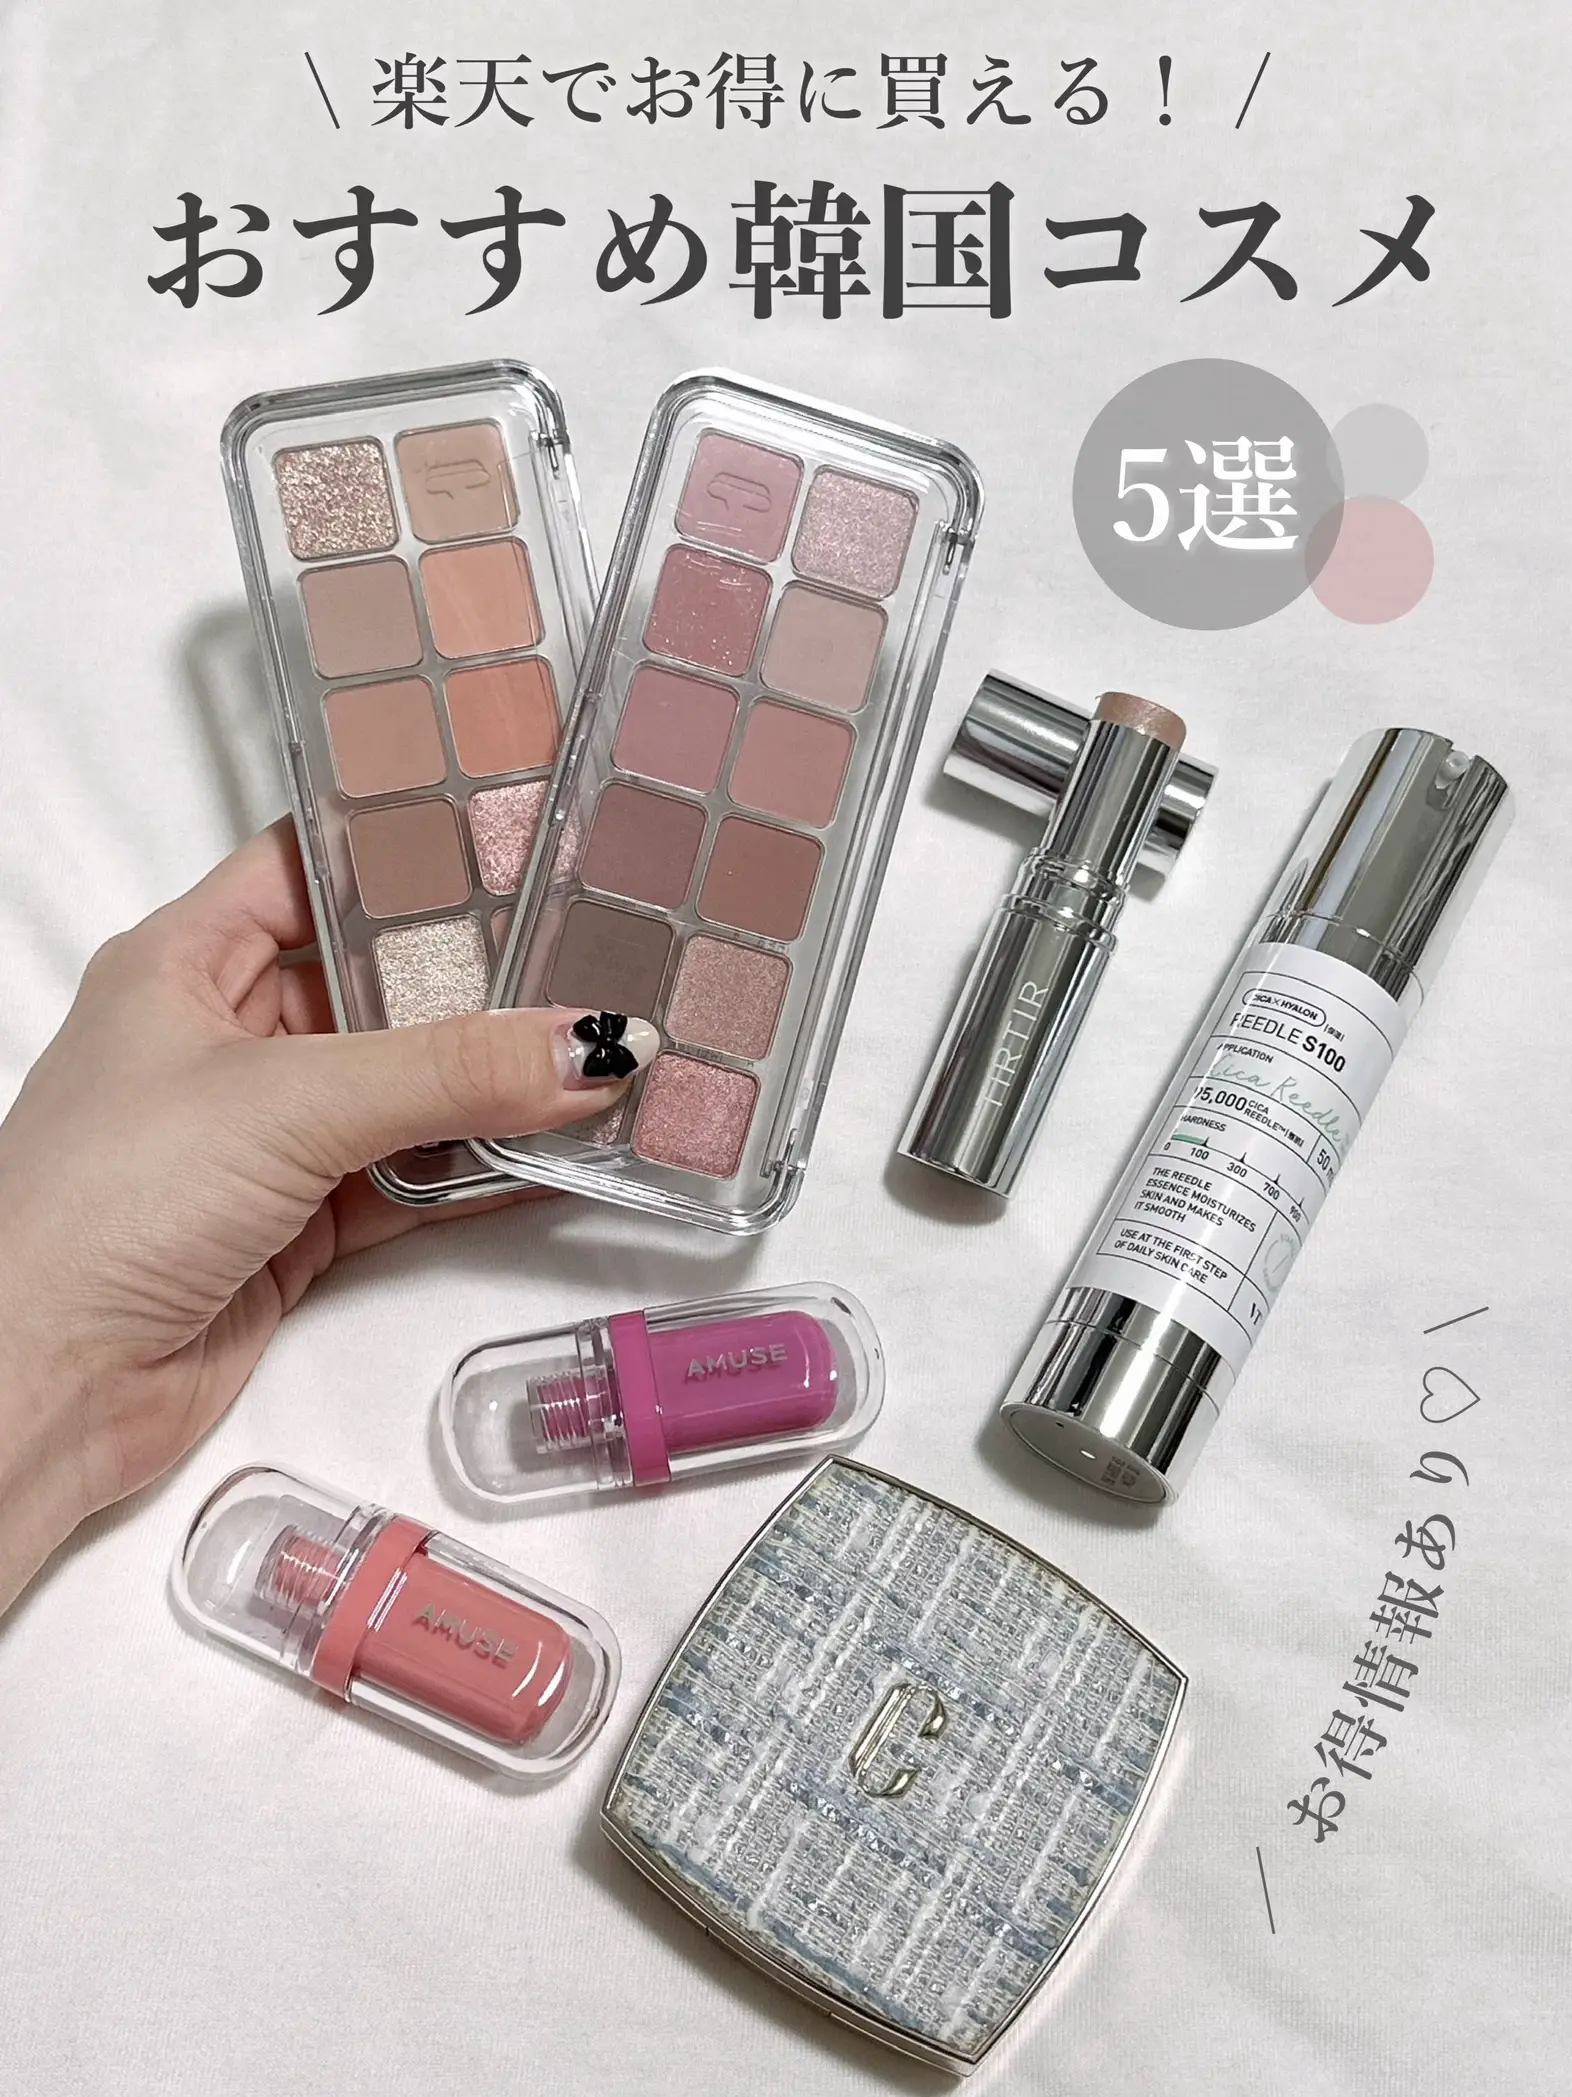 How to buy seasonal Korean cosmetics cheaply [If you don't know